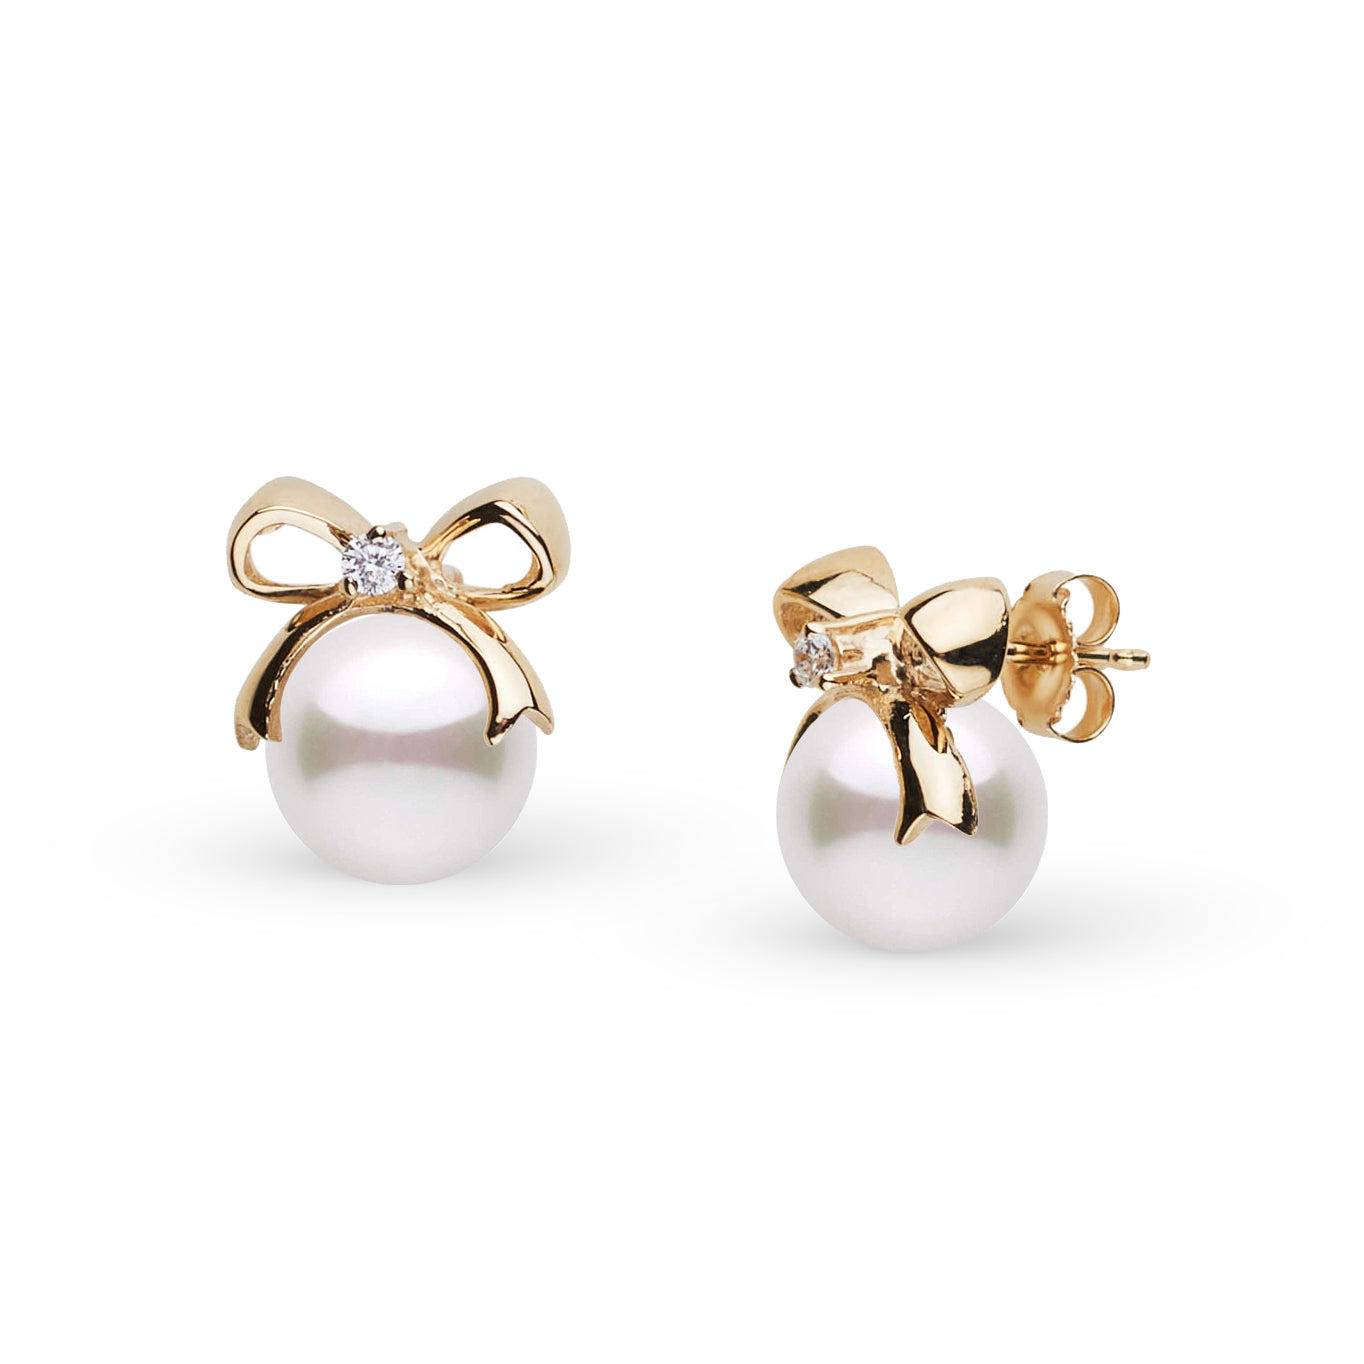 Perfect Gift Collection 7.0-7.5 mm Akoya Pearl and Diamond Earrings yellow gold front and side